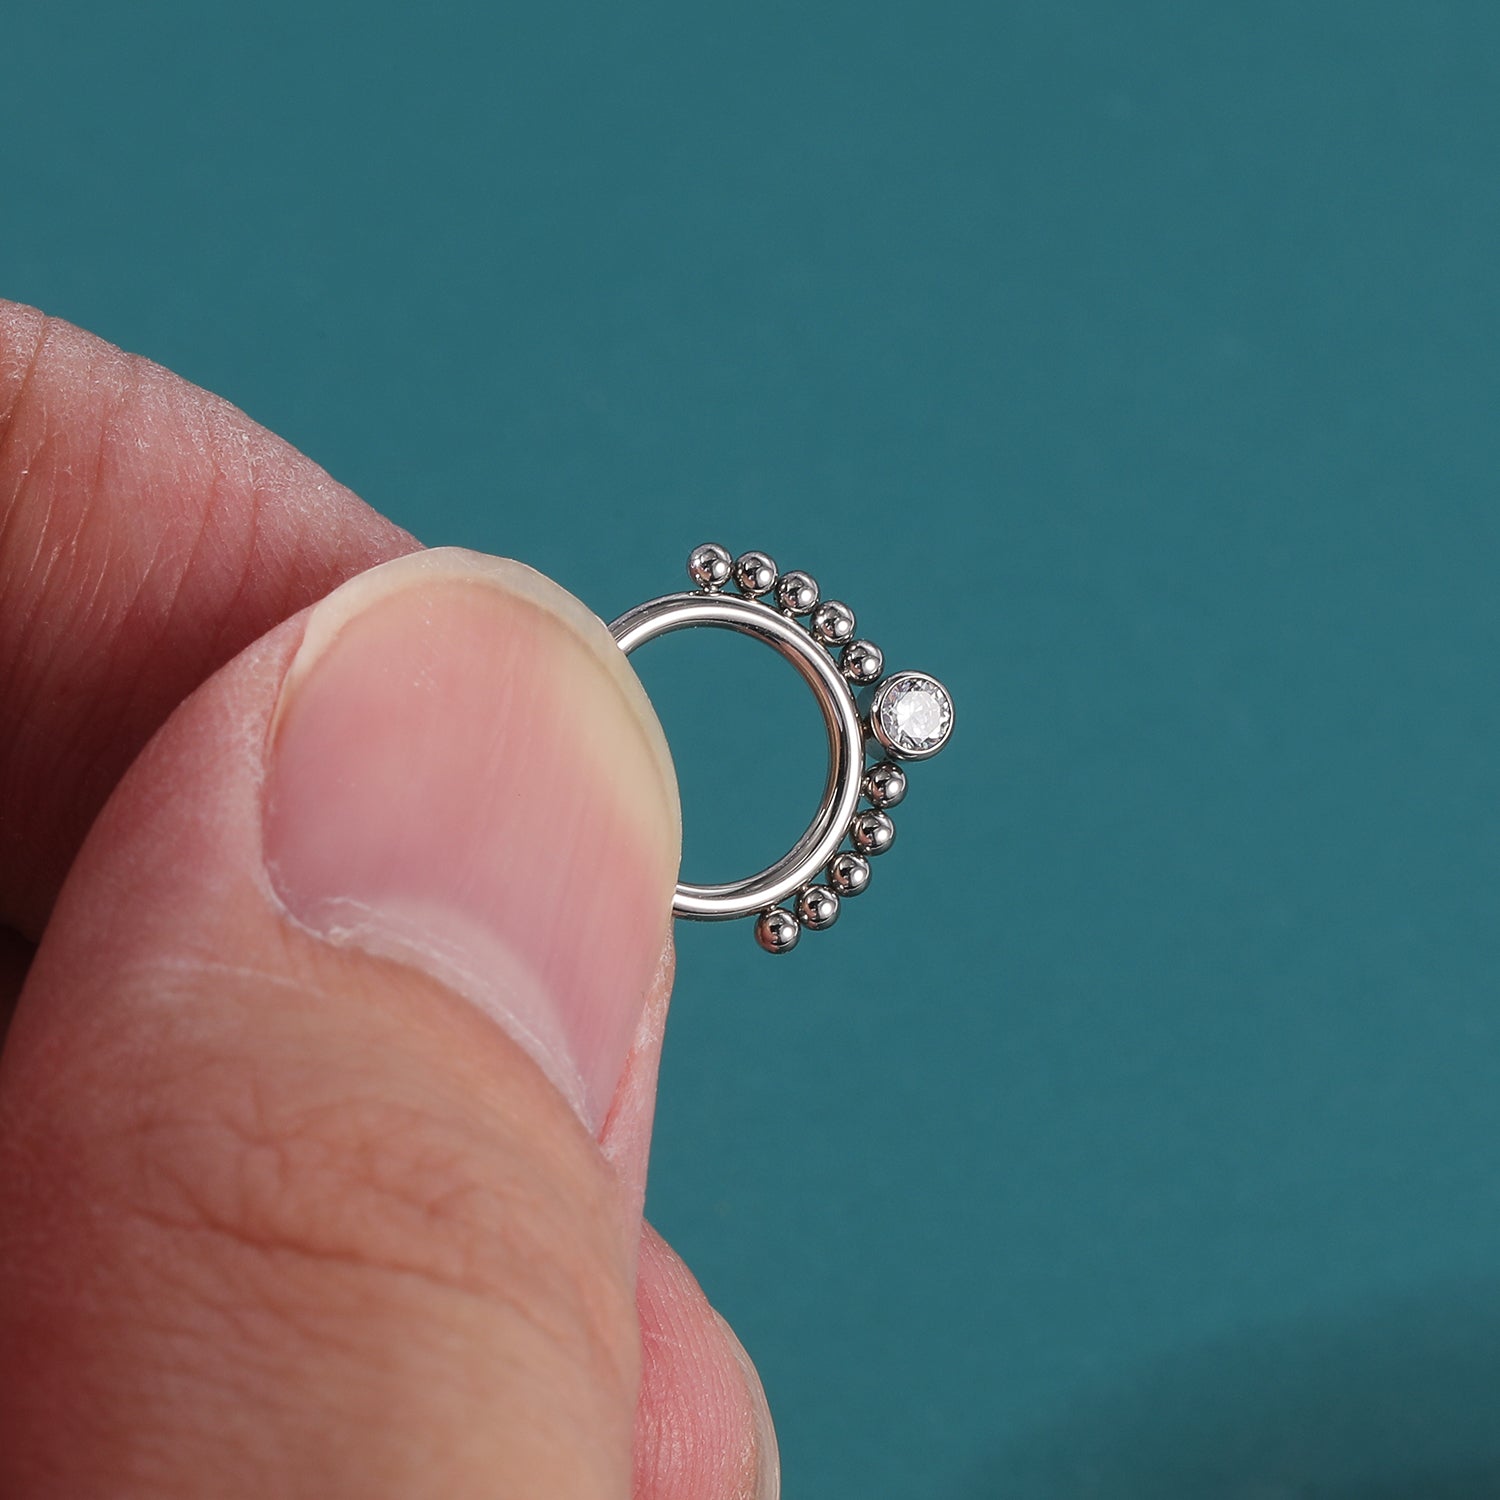 16g-zircon-nose-septum-ring-stainless-steel-ball-clicker-cartilage-helix-piercing